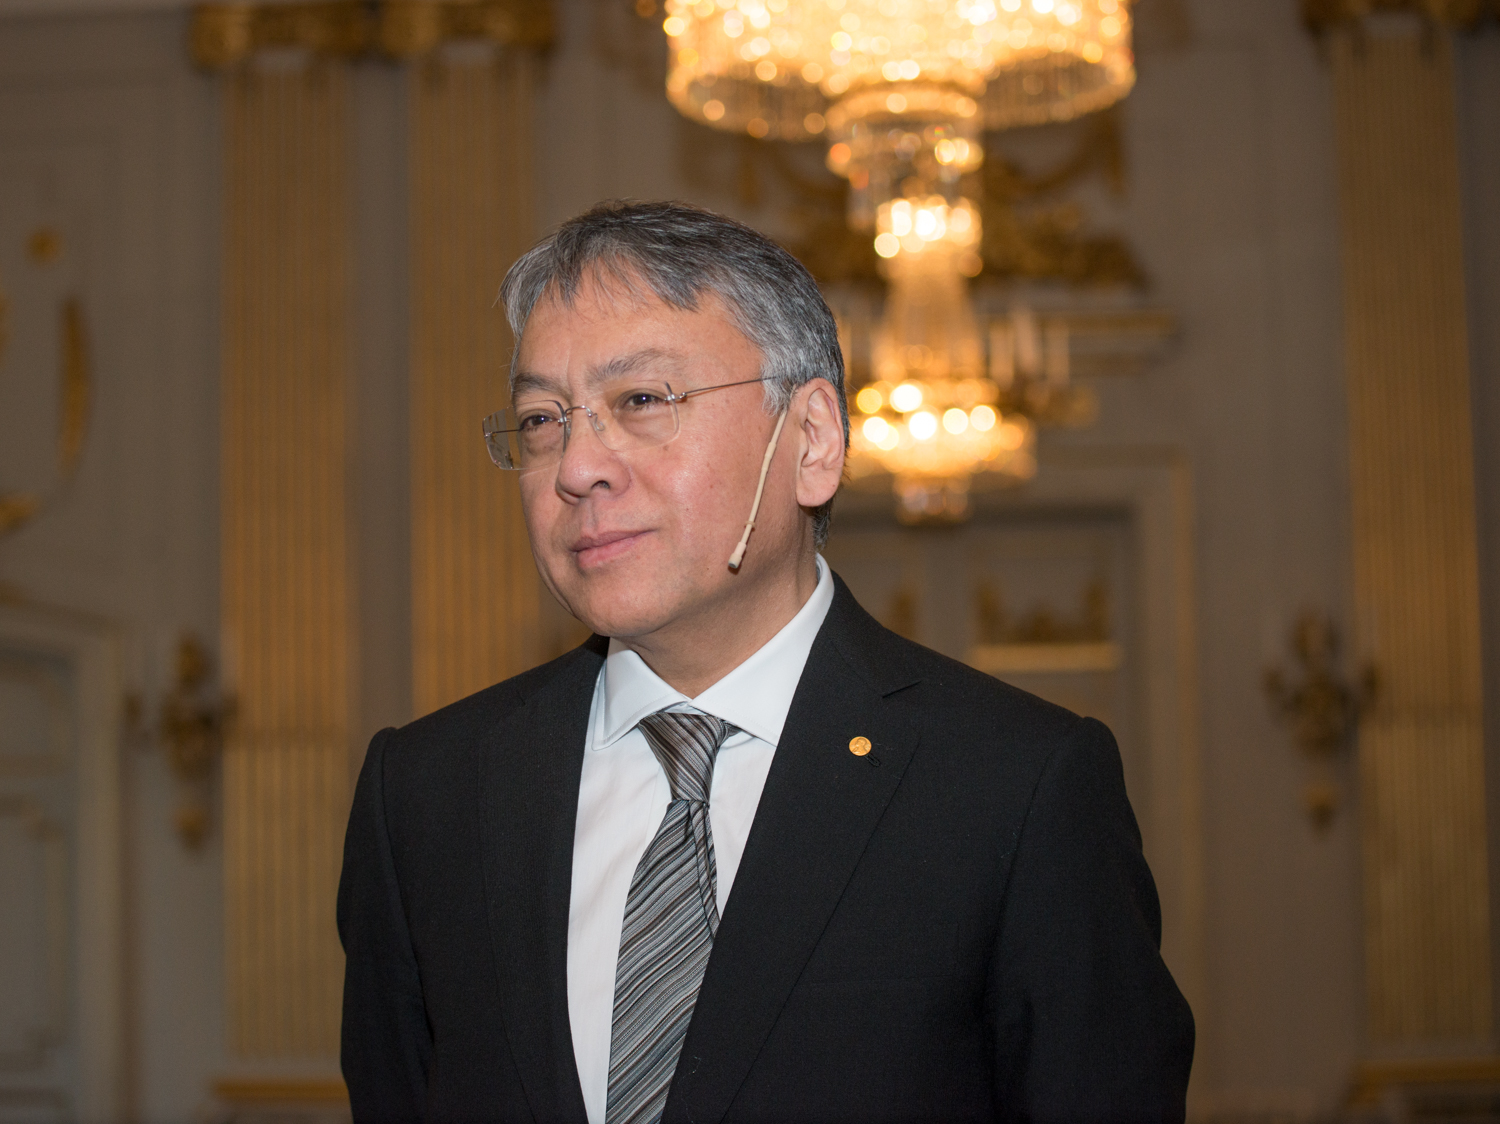 Kazuo Ishiguro/By Frankie Fouganthin (Own work) [CC BY-SA 4.0 (https://creativecommons.org/licenses/by-sa/4.0)], via Wikimedia Commons